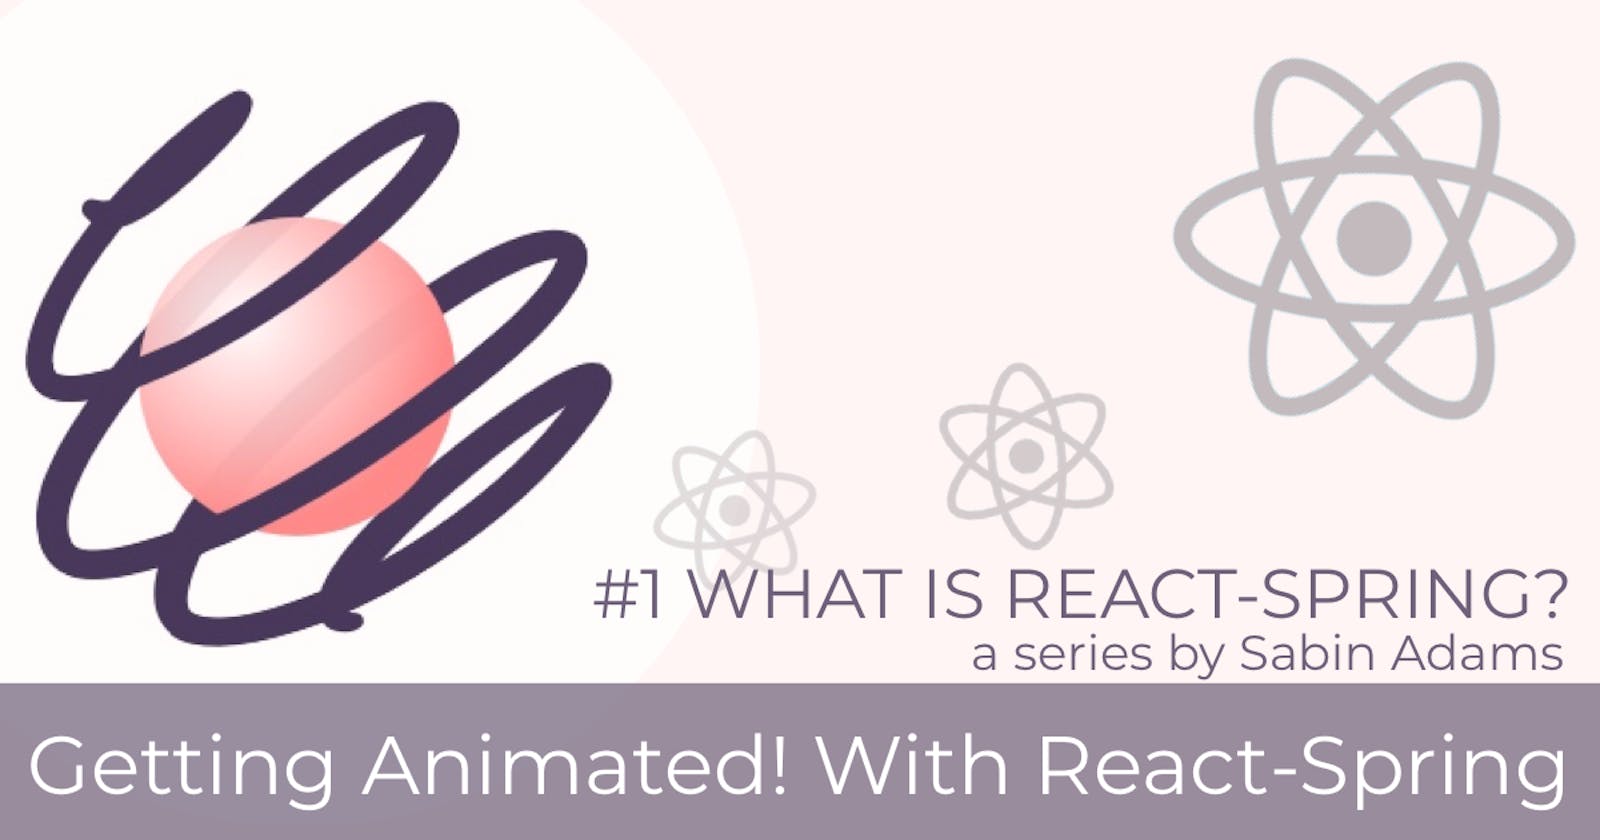 Getting Animated! With React-Spring #1: What Is React-Spring?